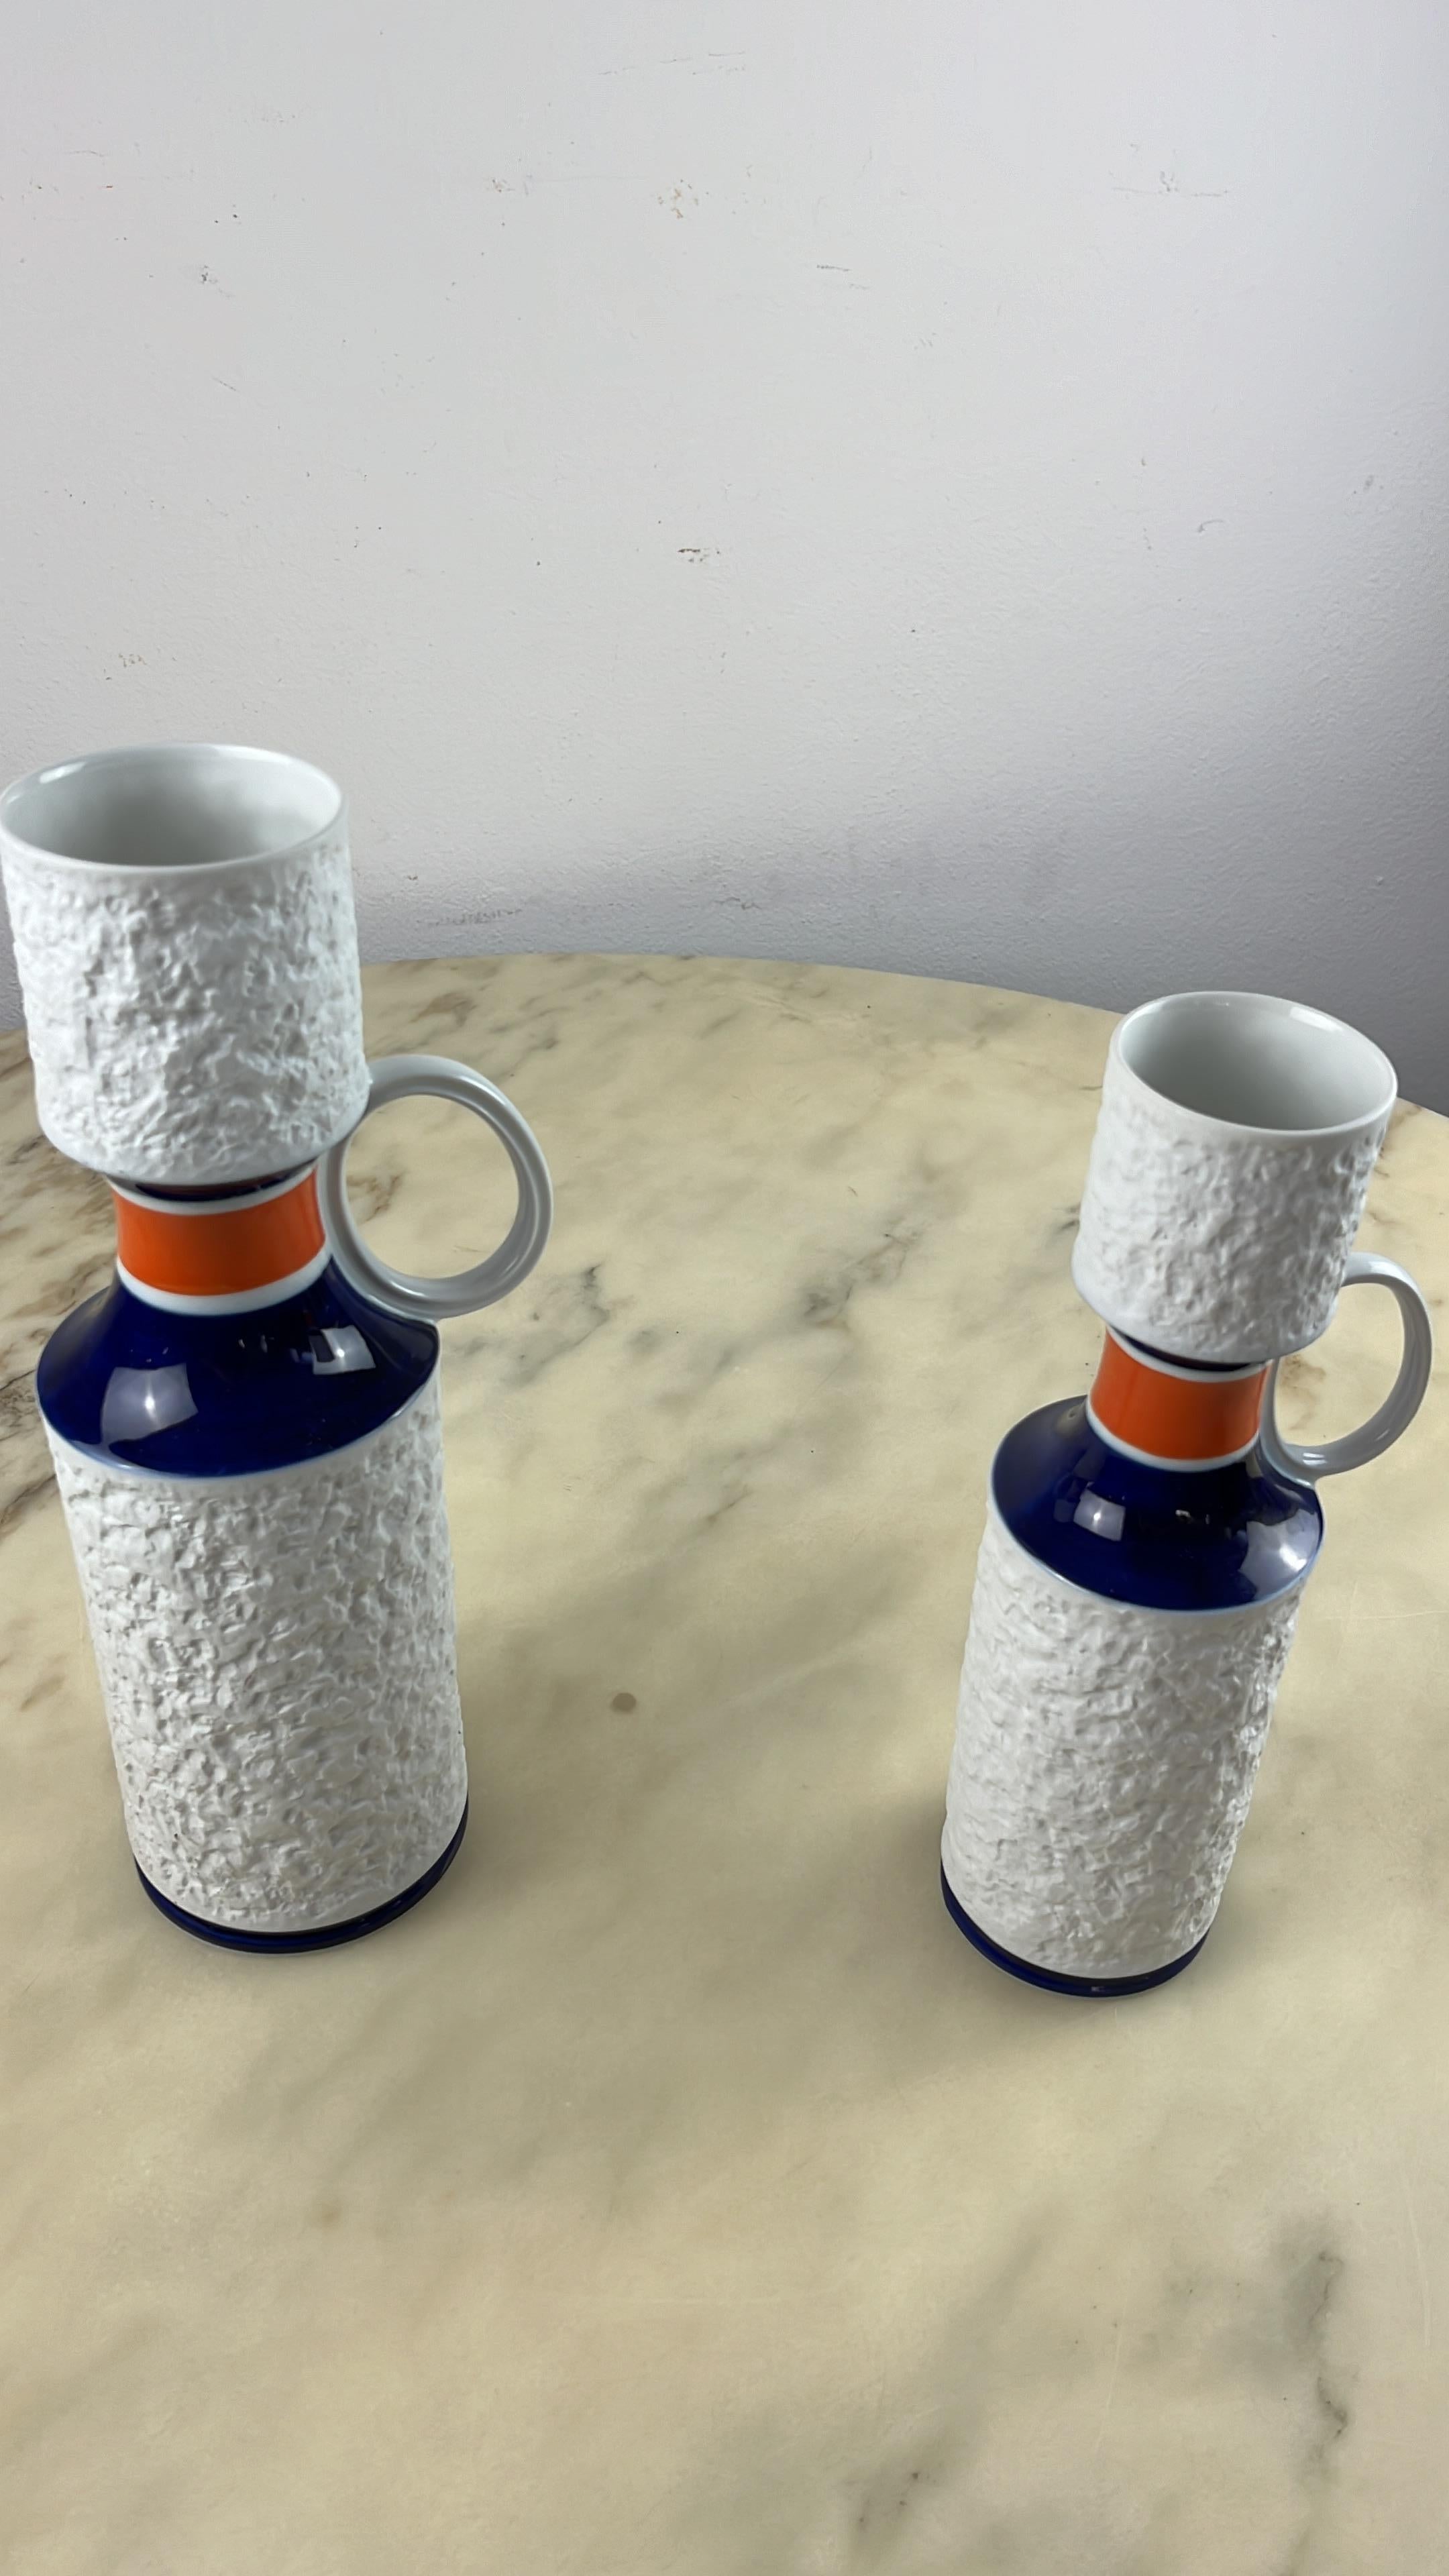 Pair of KPM Biscuit Porcelain vases, Germany, 1960s
Königliche Porzellan-Manufaktur (KPM).
Intact and in good condition.
The largest is 34 cm high and has a diameter of 10 cm; The little one is 29 cm high and has a diameter of 8 cm.